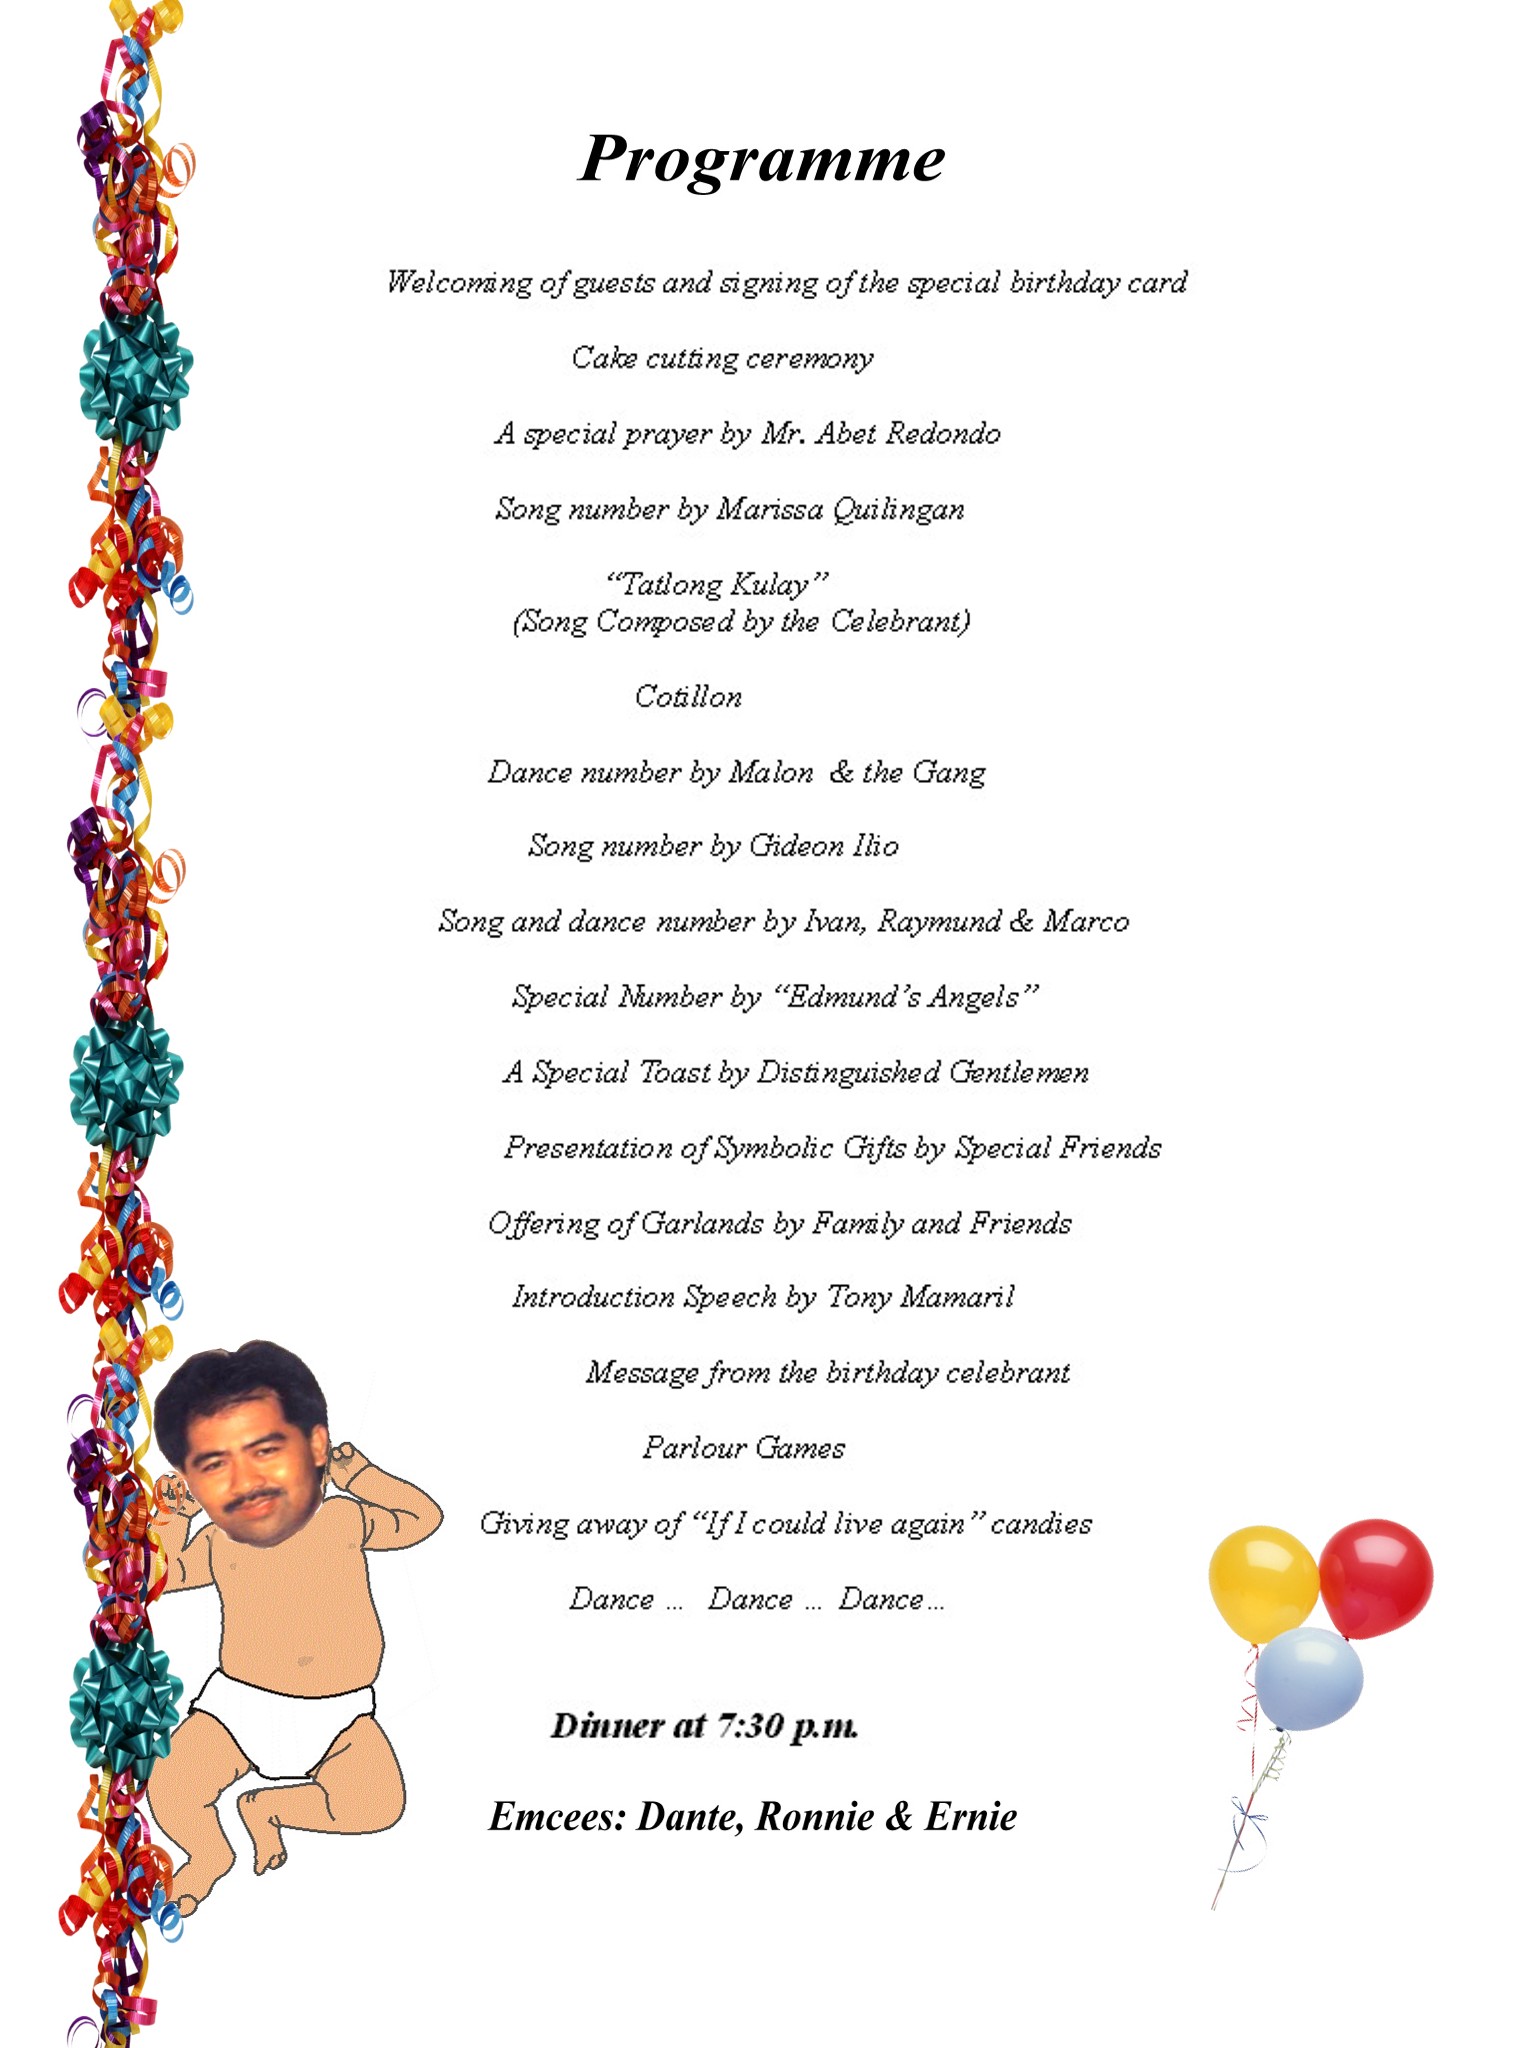 Programme for Sir Ed's Birthday Party